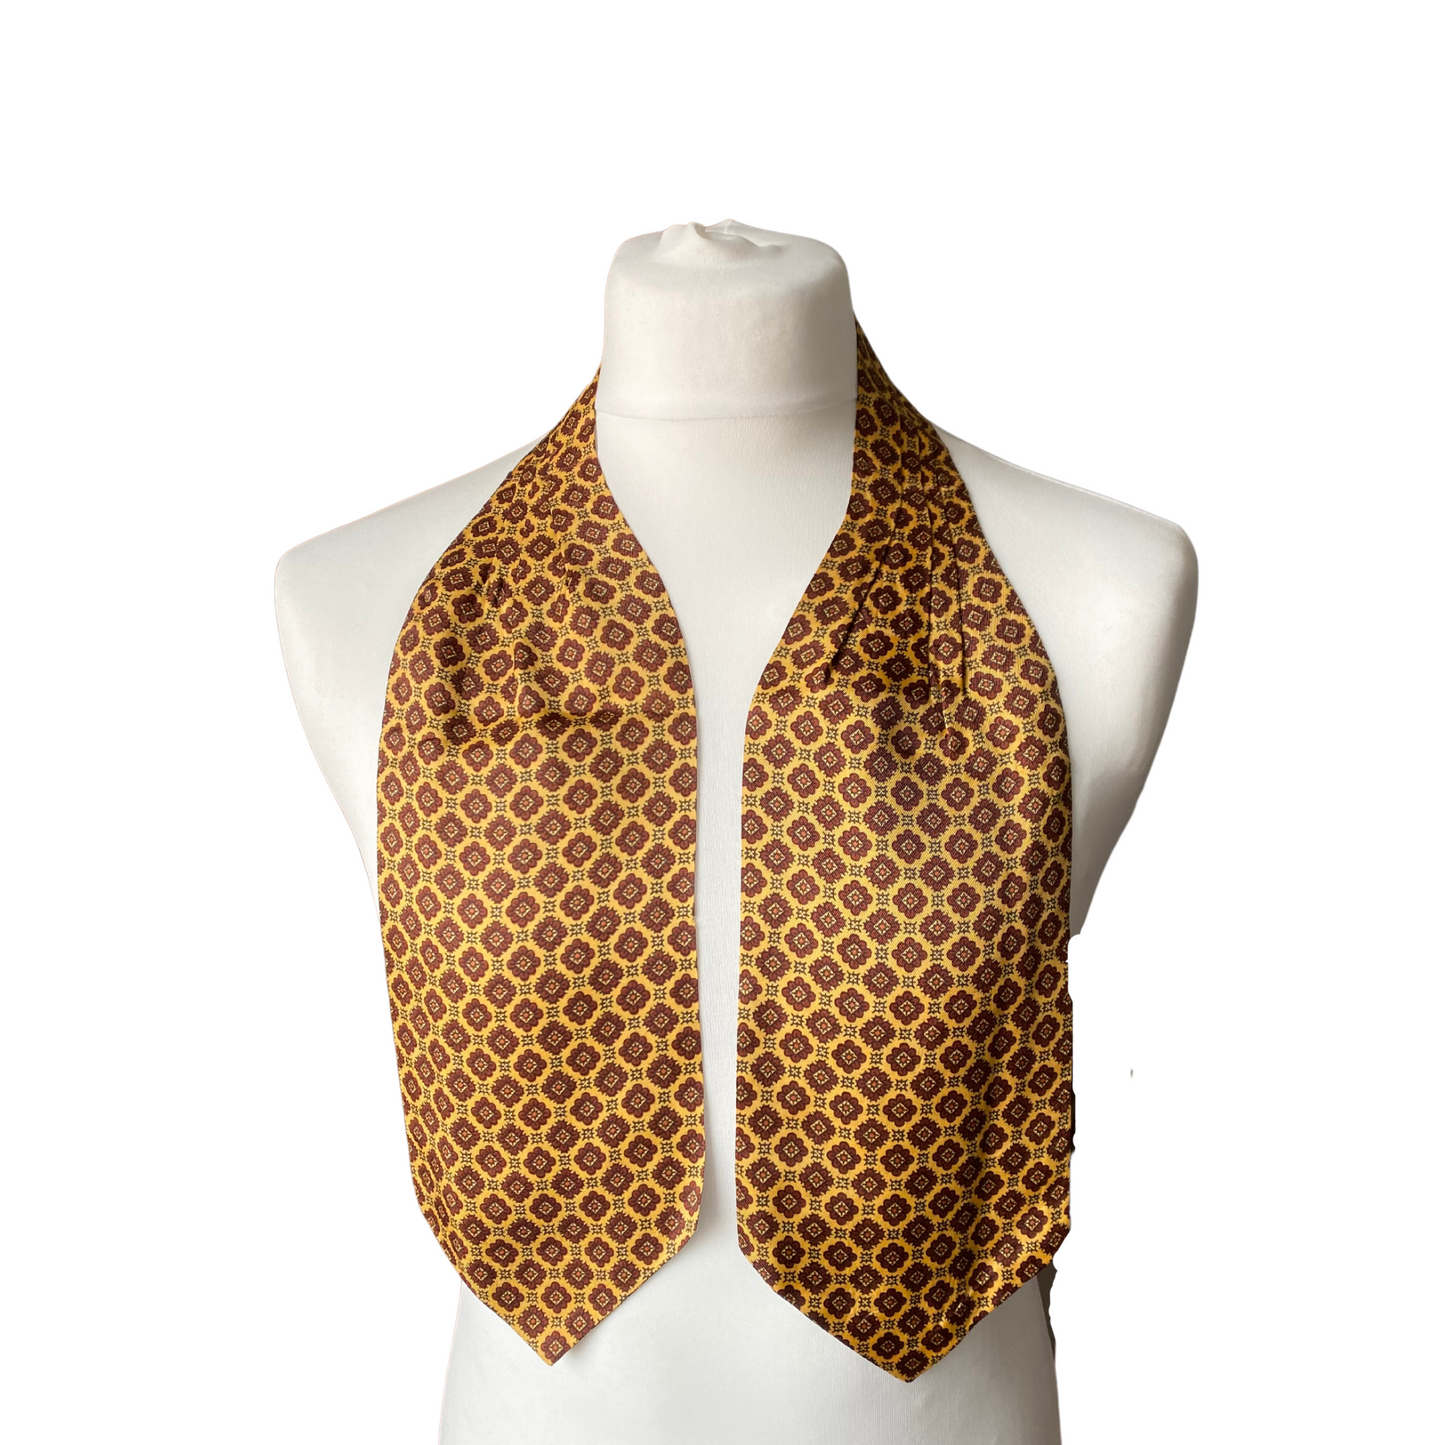 Vintage gold yellow cravat with dark red and black flower print 